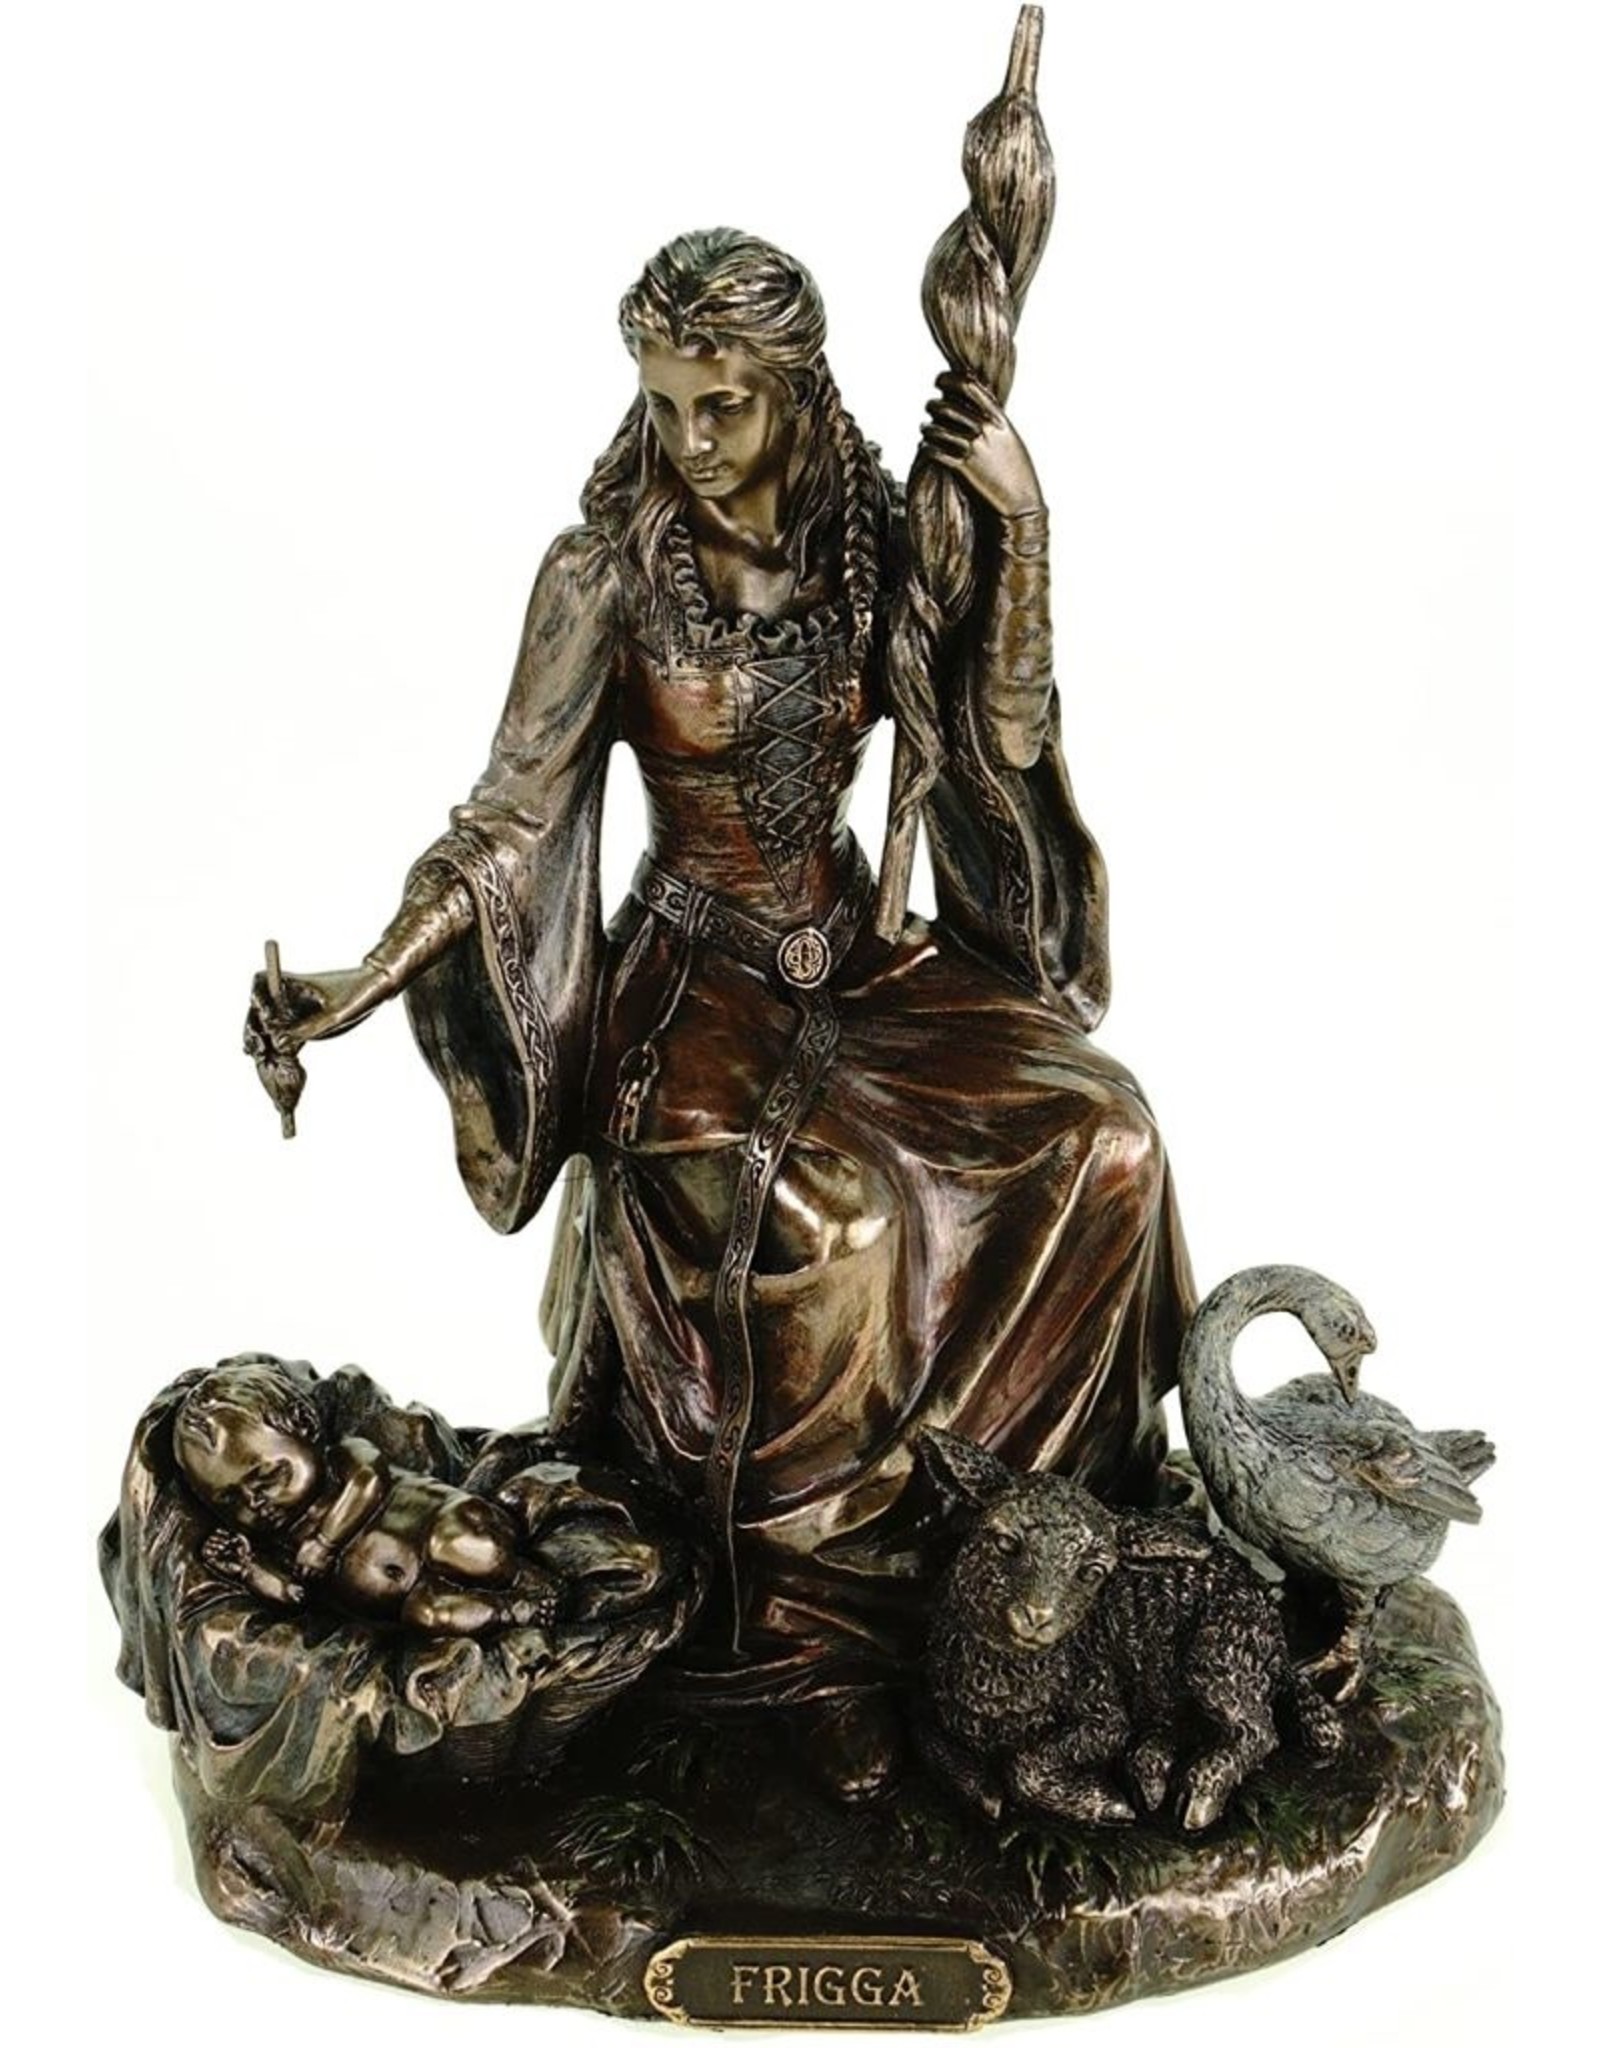 Veronese Design Giftware & Lifestyle - Frigga Nordic Goddess of Love, Marriage and Destiny statue